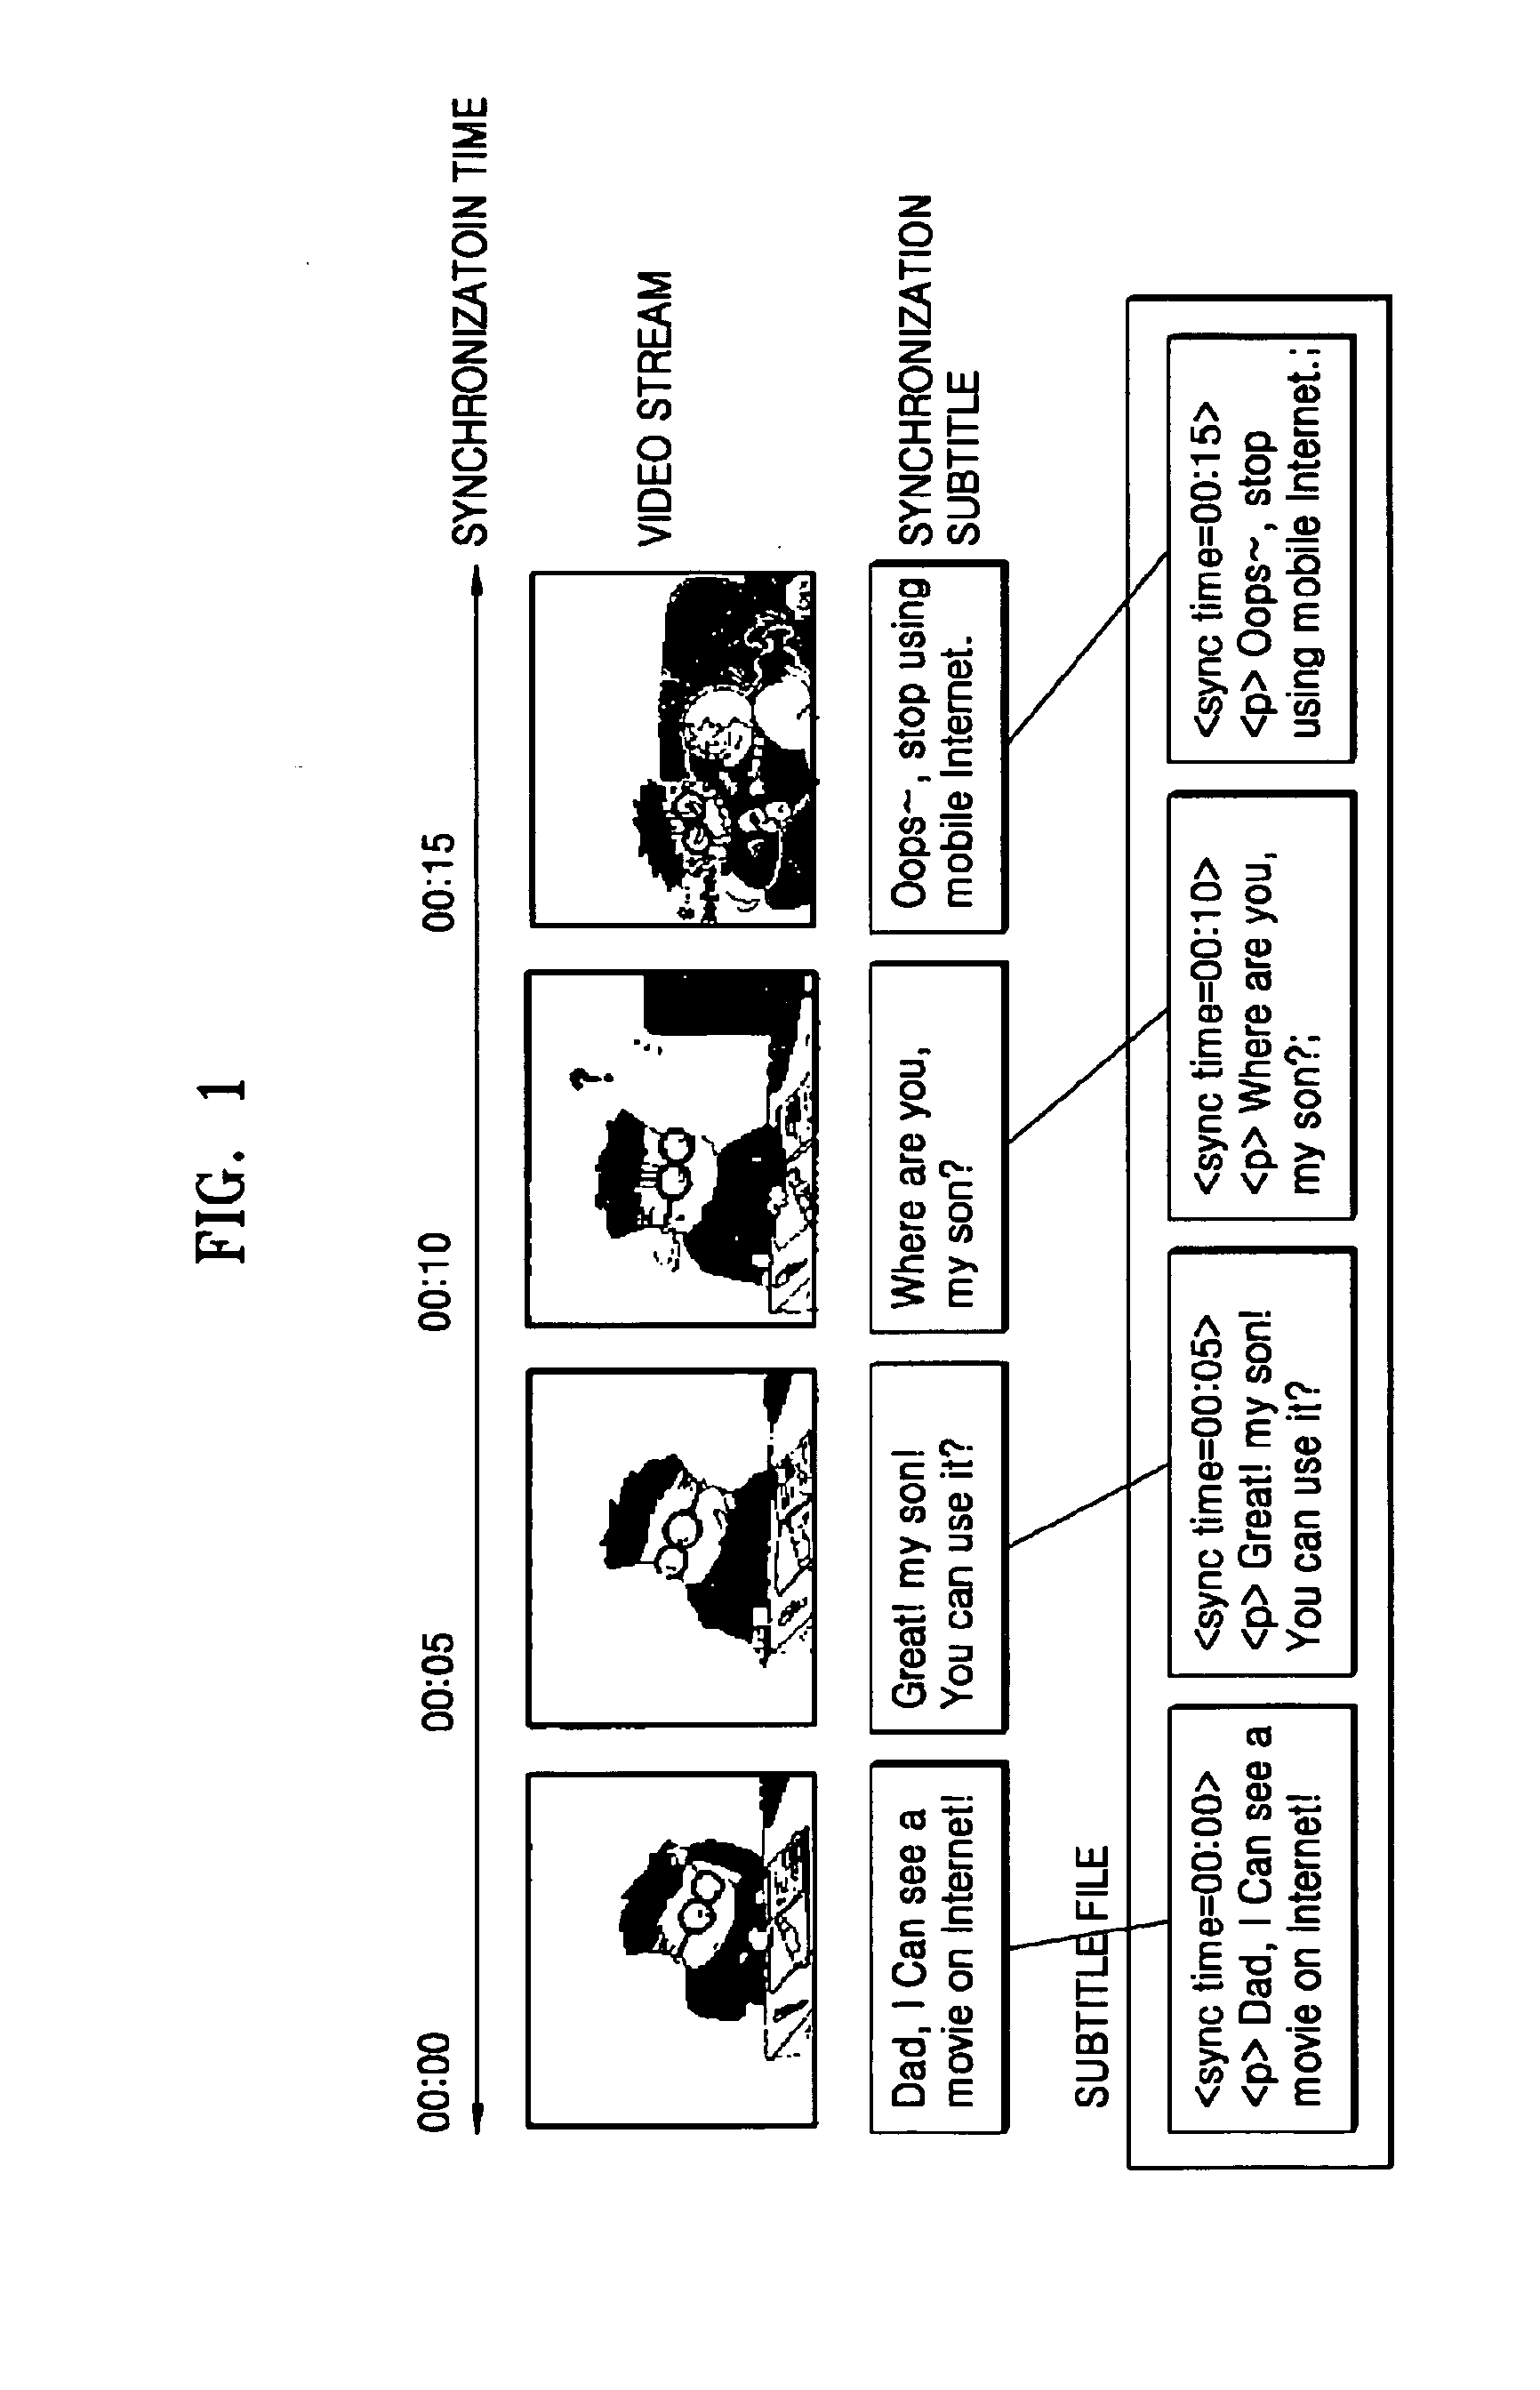 Storage Medium For Recording Subtitle Information Based On Test Corresponding To Av Data Having Multiple Playback Routes, Reproducing Apparatus And Method Therefor